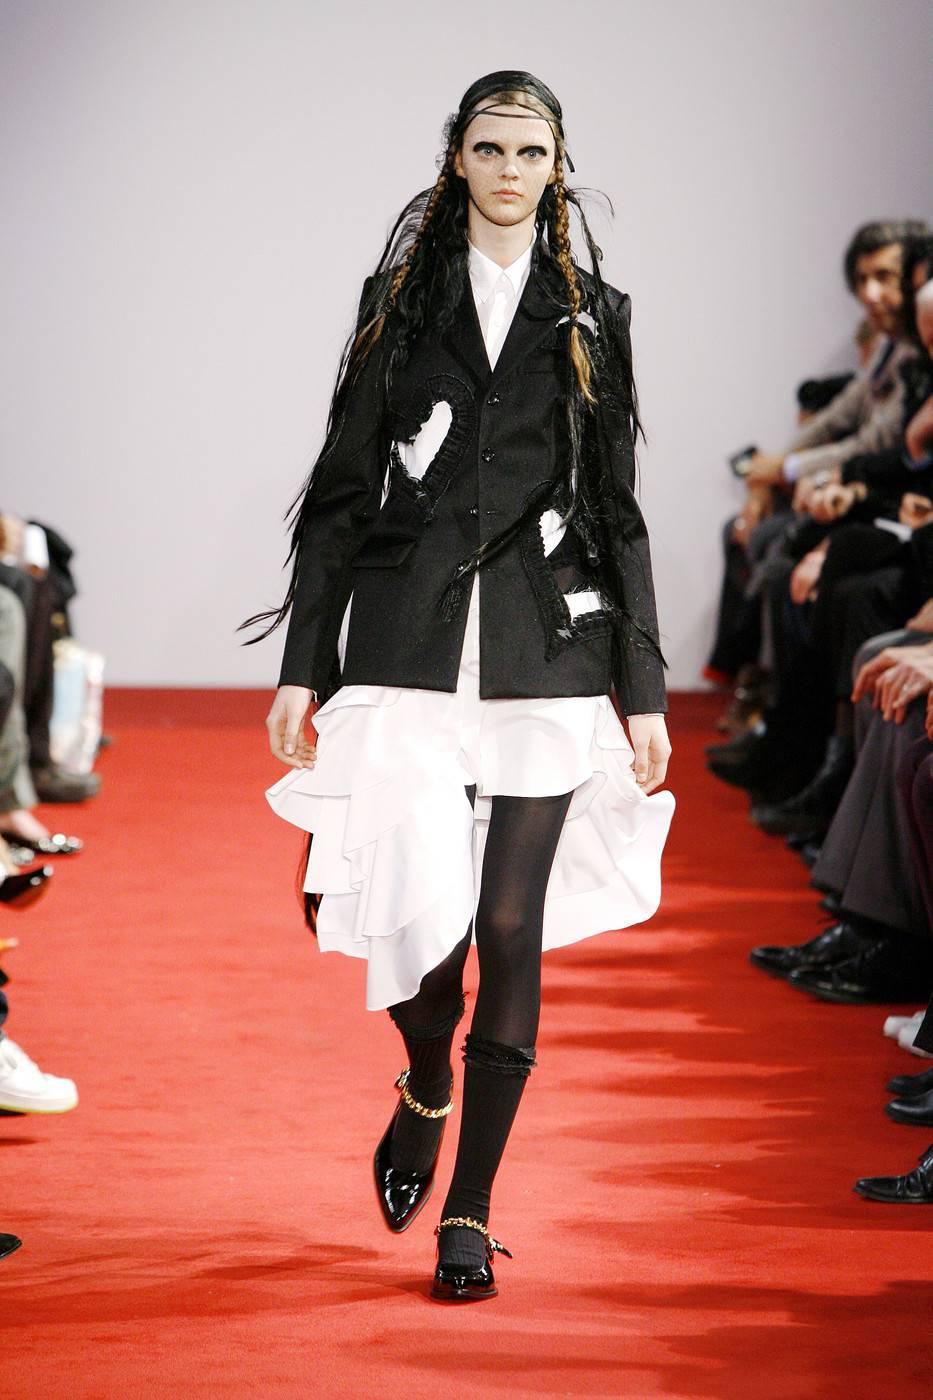 COMME DES GARCONS 'bad taste' runway blazer with open hearts and tiered skirt 5